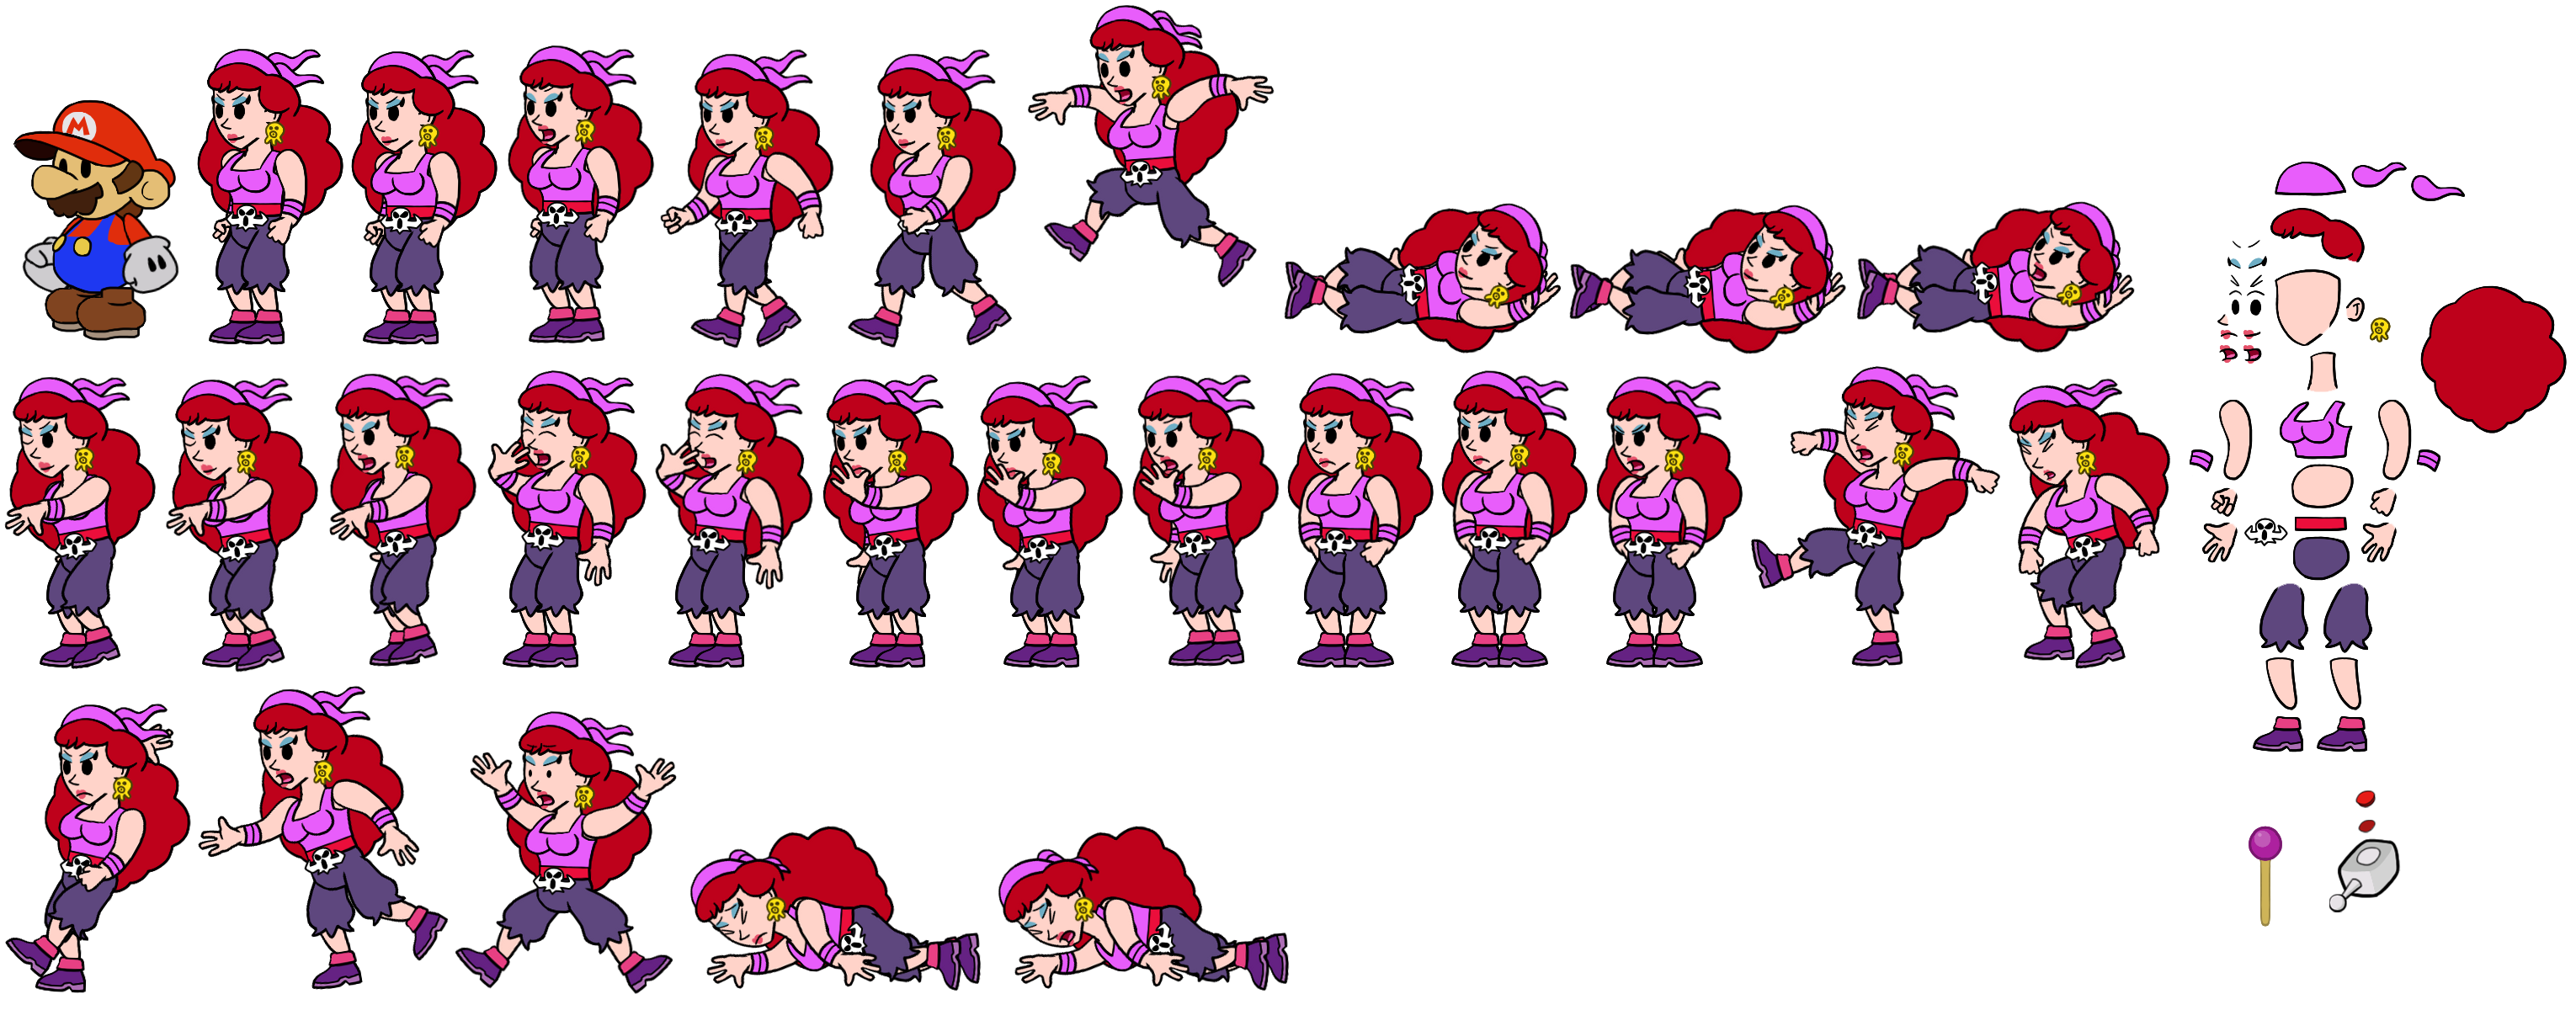 Captain Syrup (Paper Mario-Style, Modern)